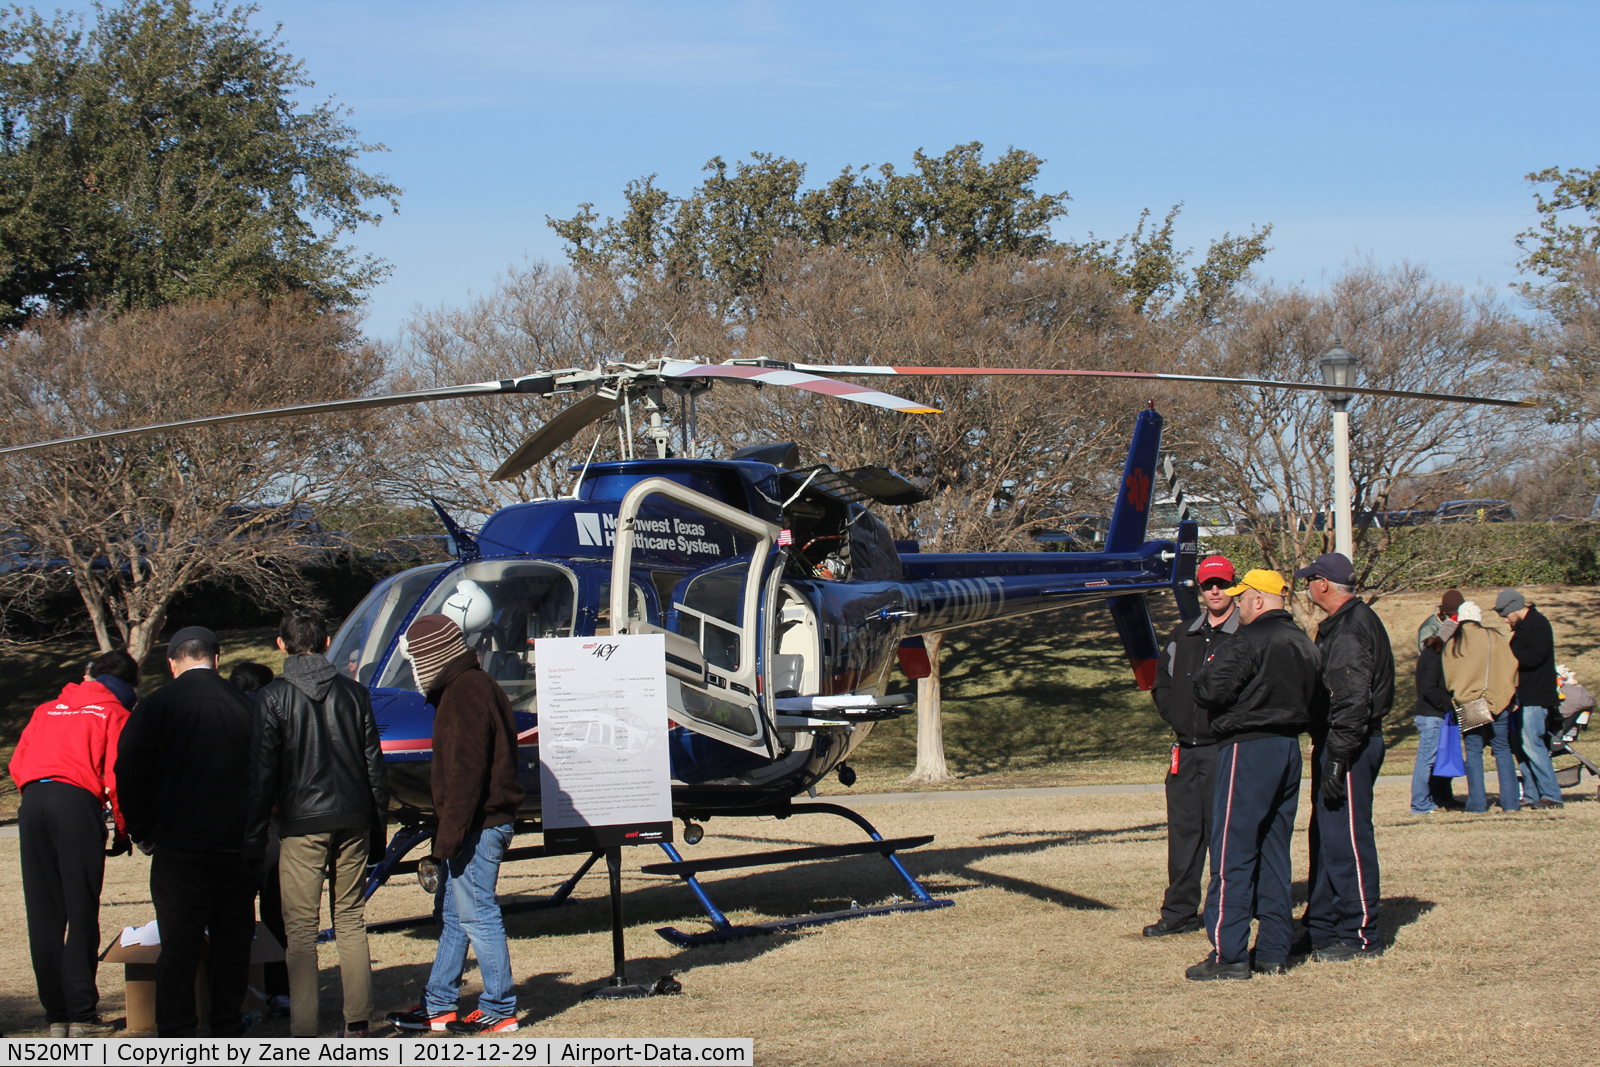 N520MT, 2007 Bell 407 C/N 53805, On display at the 2013 Armed Forces Bowl in Fort Worth, TX